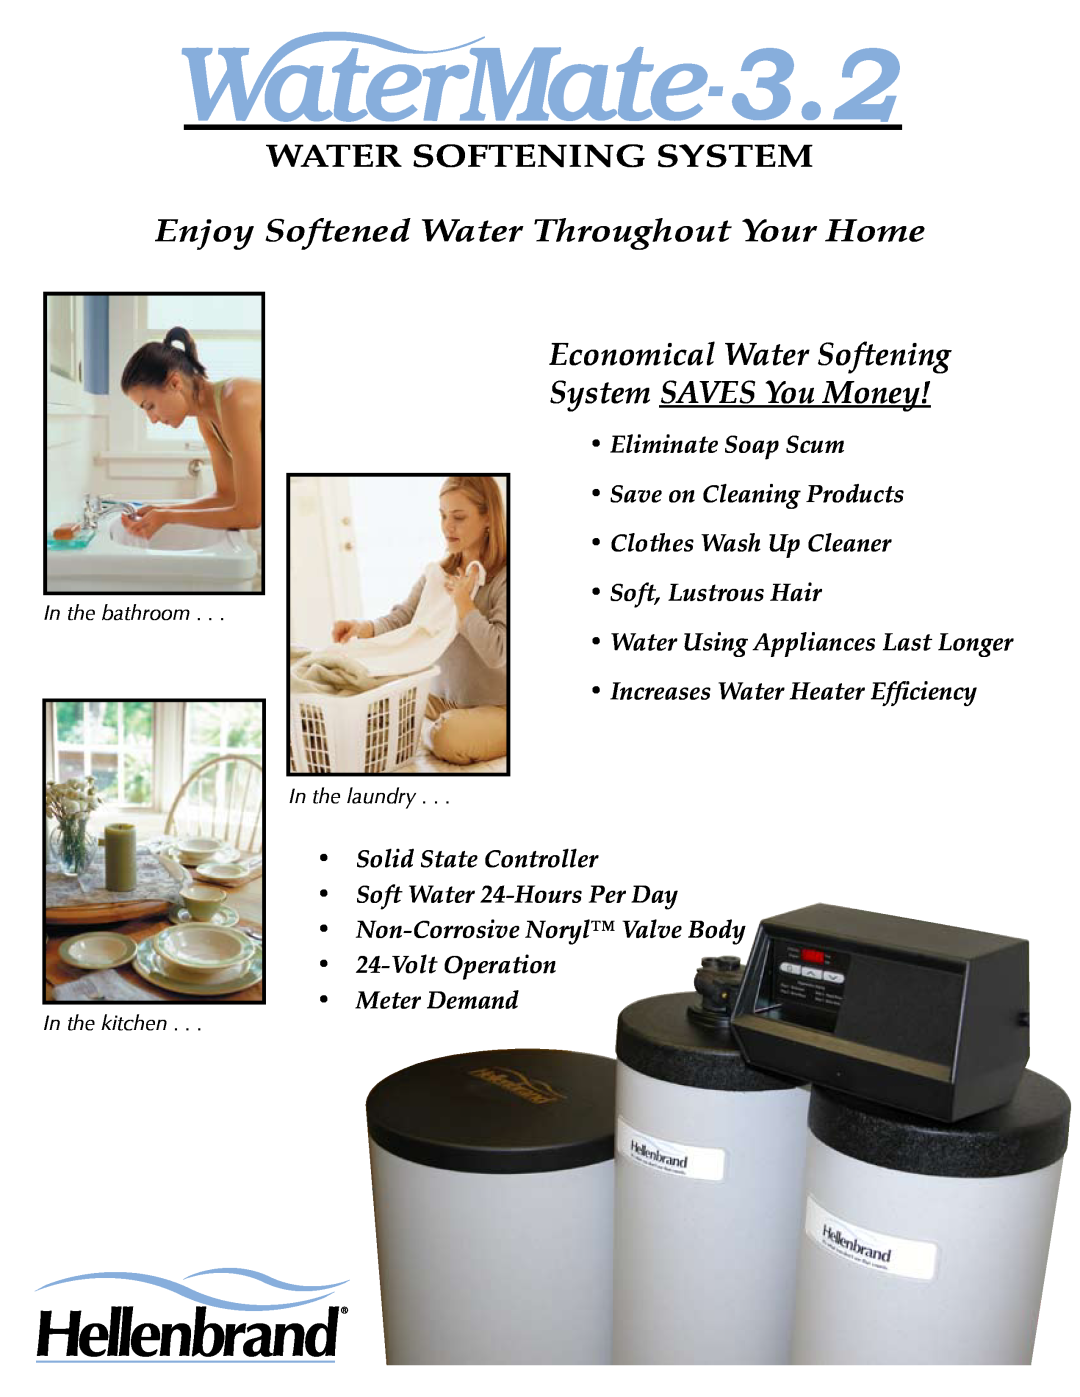 Hellenbrand 3.2 manual Water Softening System, Enjoy Softened Water Throughout Your Home 